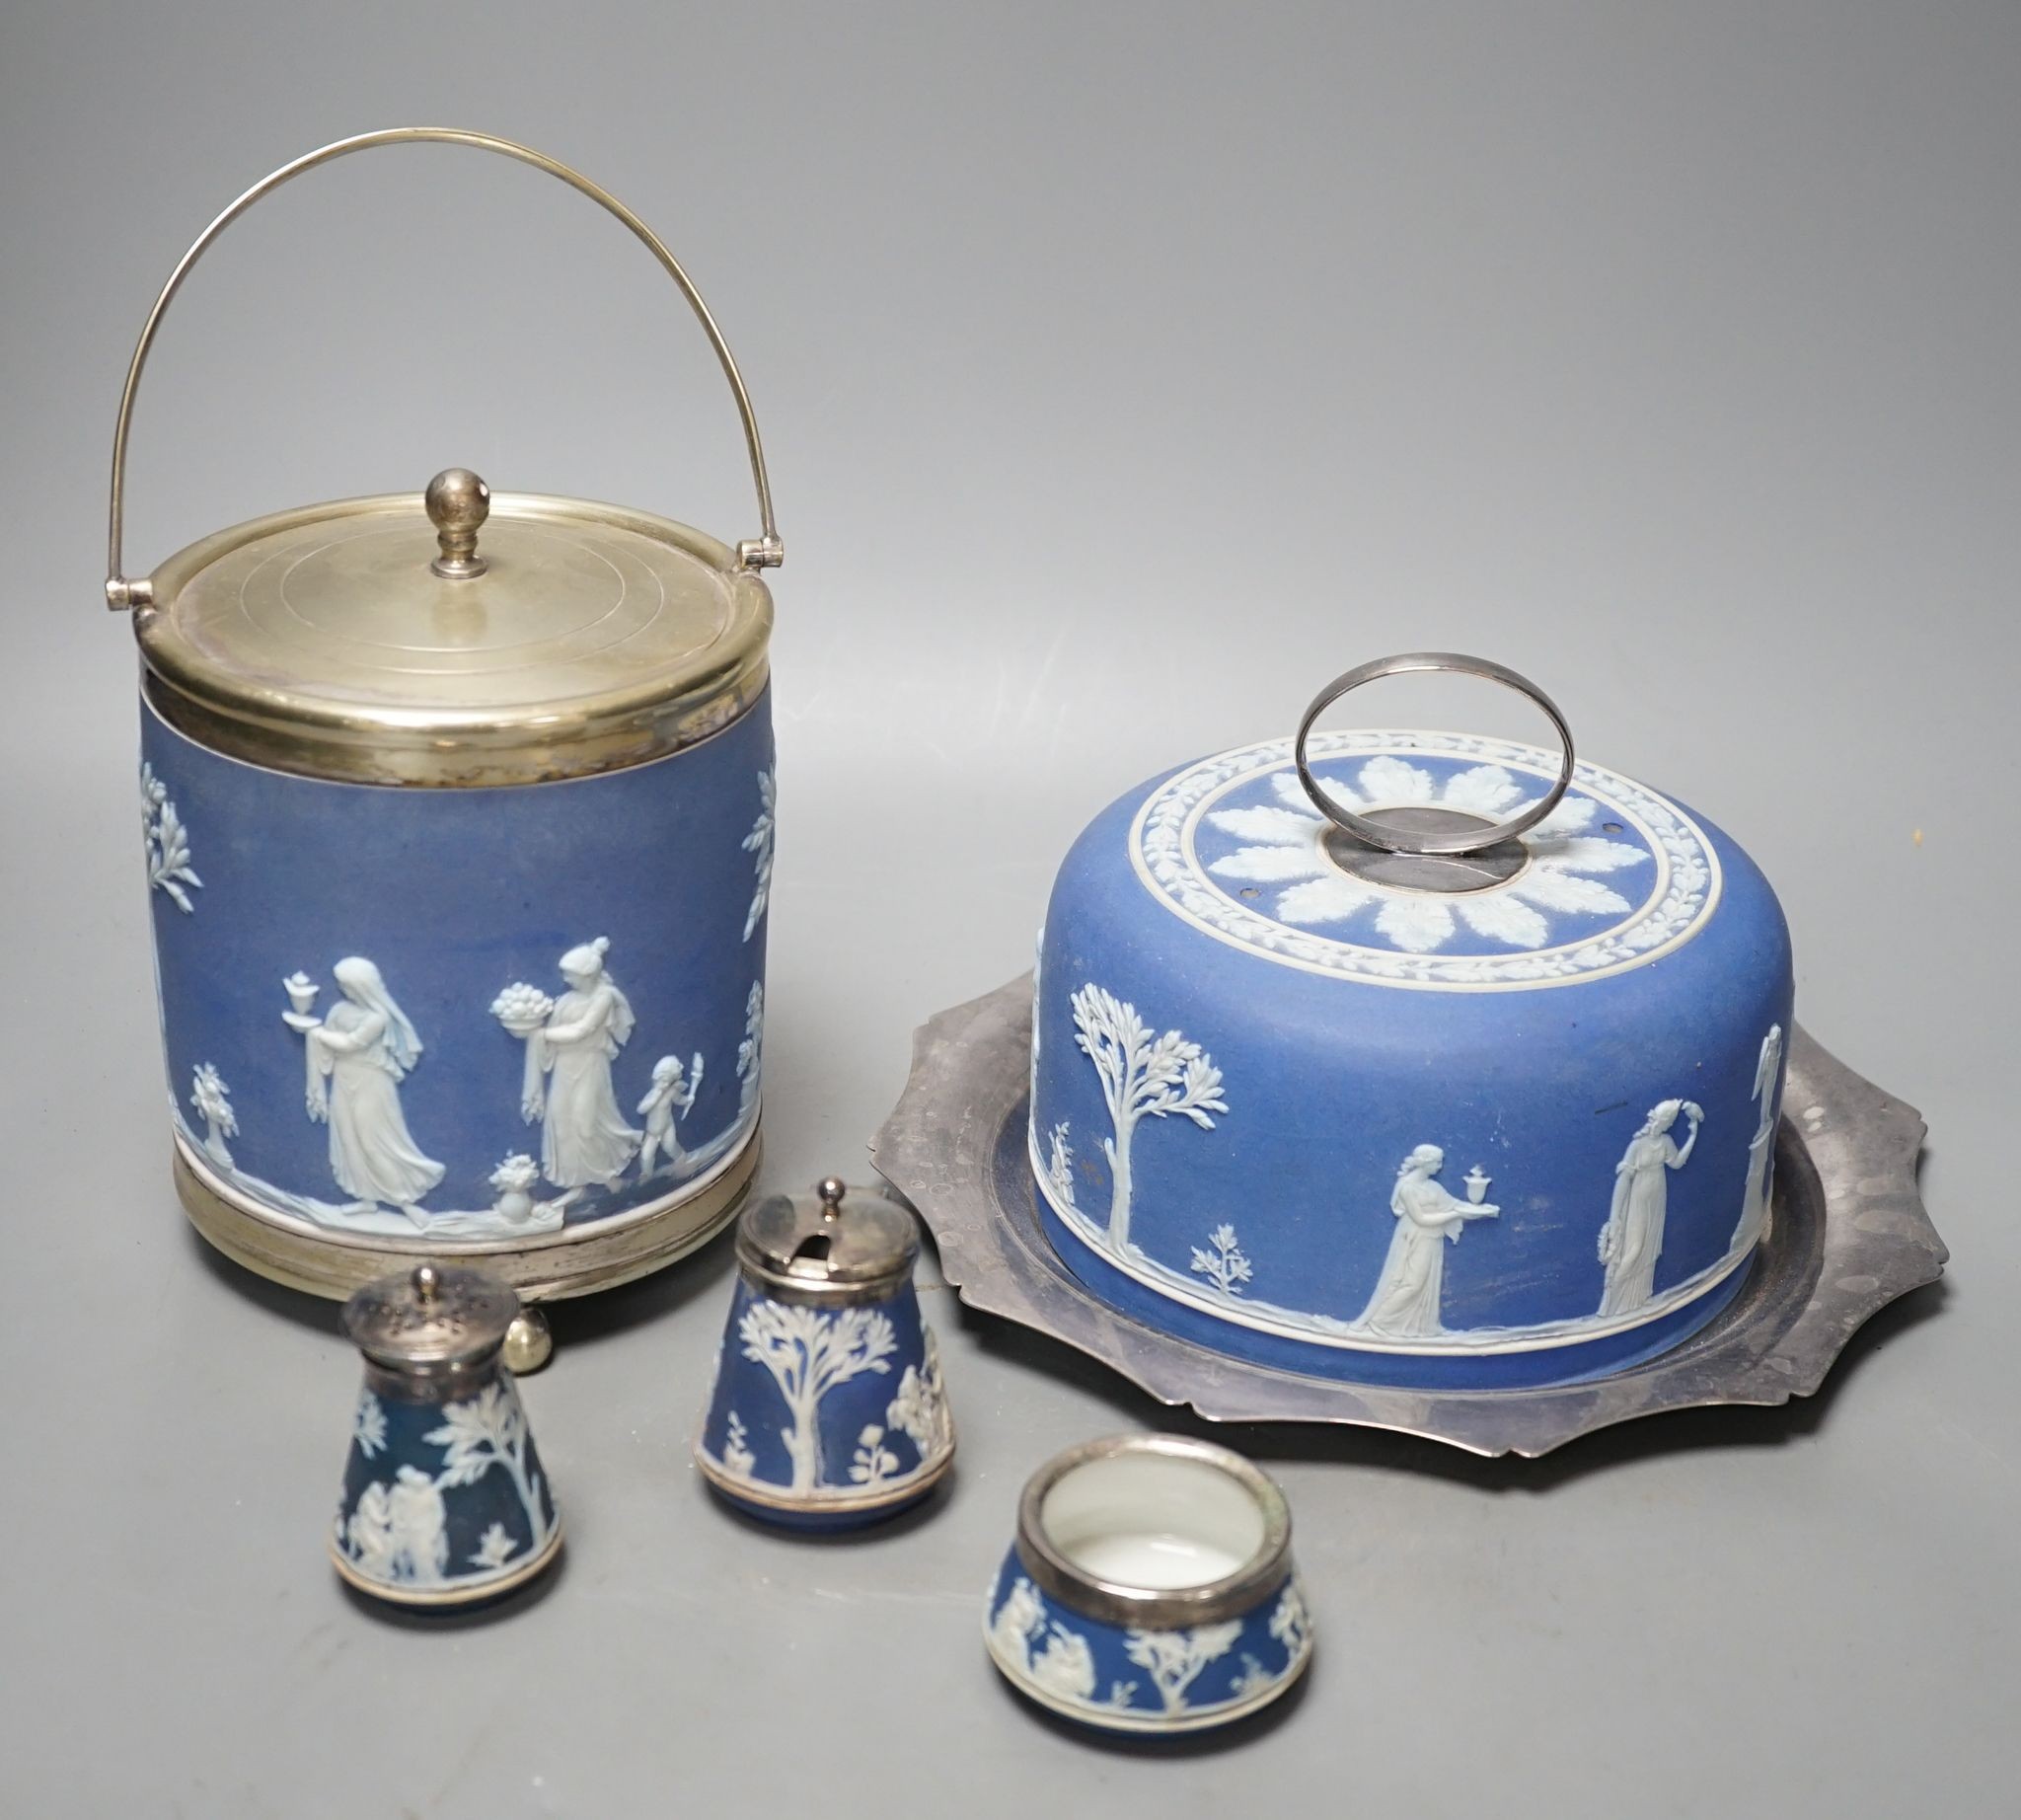 A Victorian Wedgwood blue jasper biscuit barrel and a blue jasper cheese dish cover, with a plated stand , 3 piece condiment set